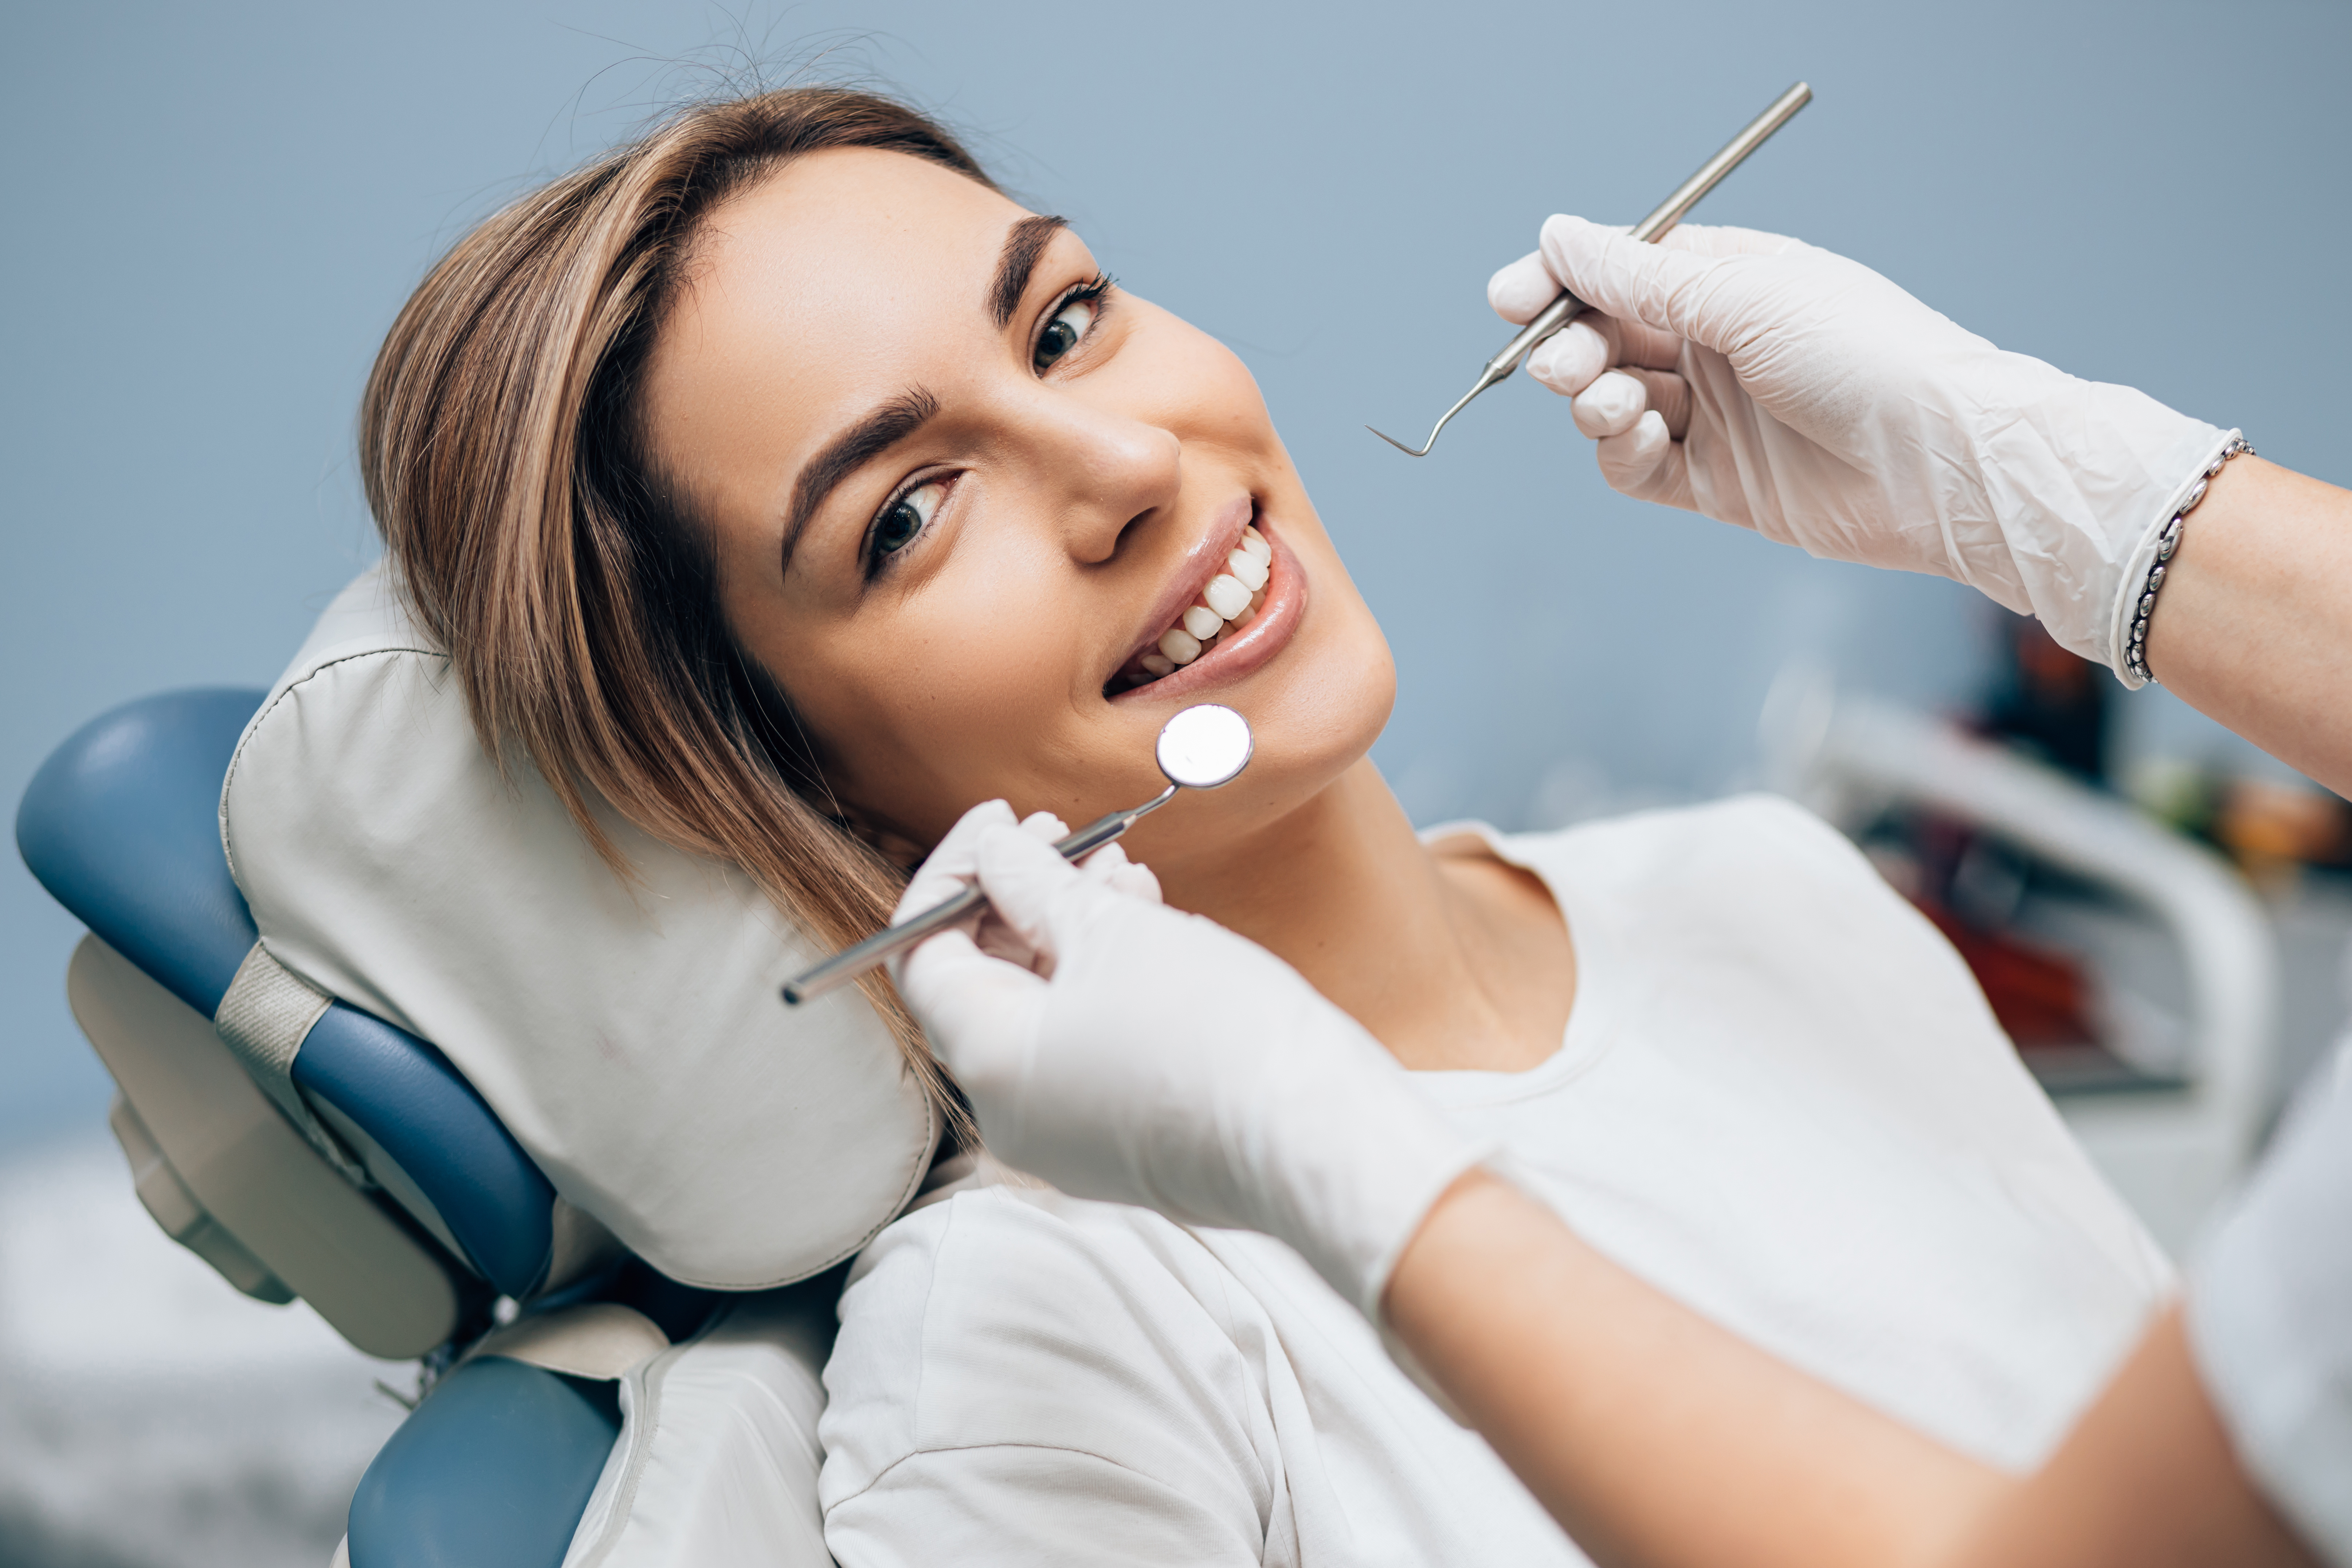 Tips and techniques to overcome the fear of the dentist